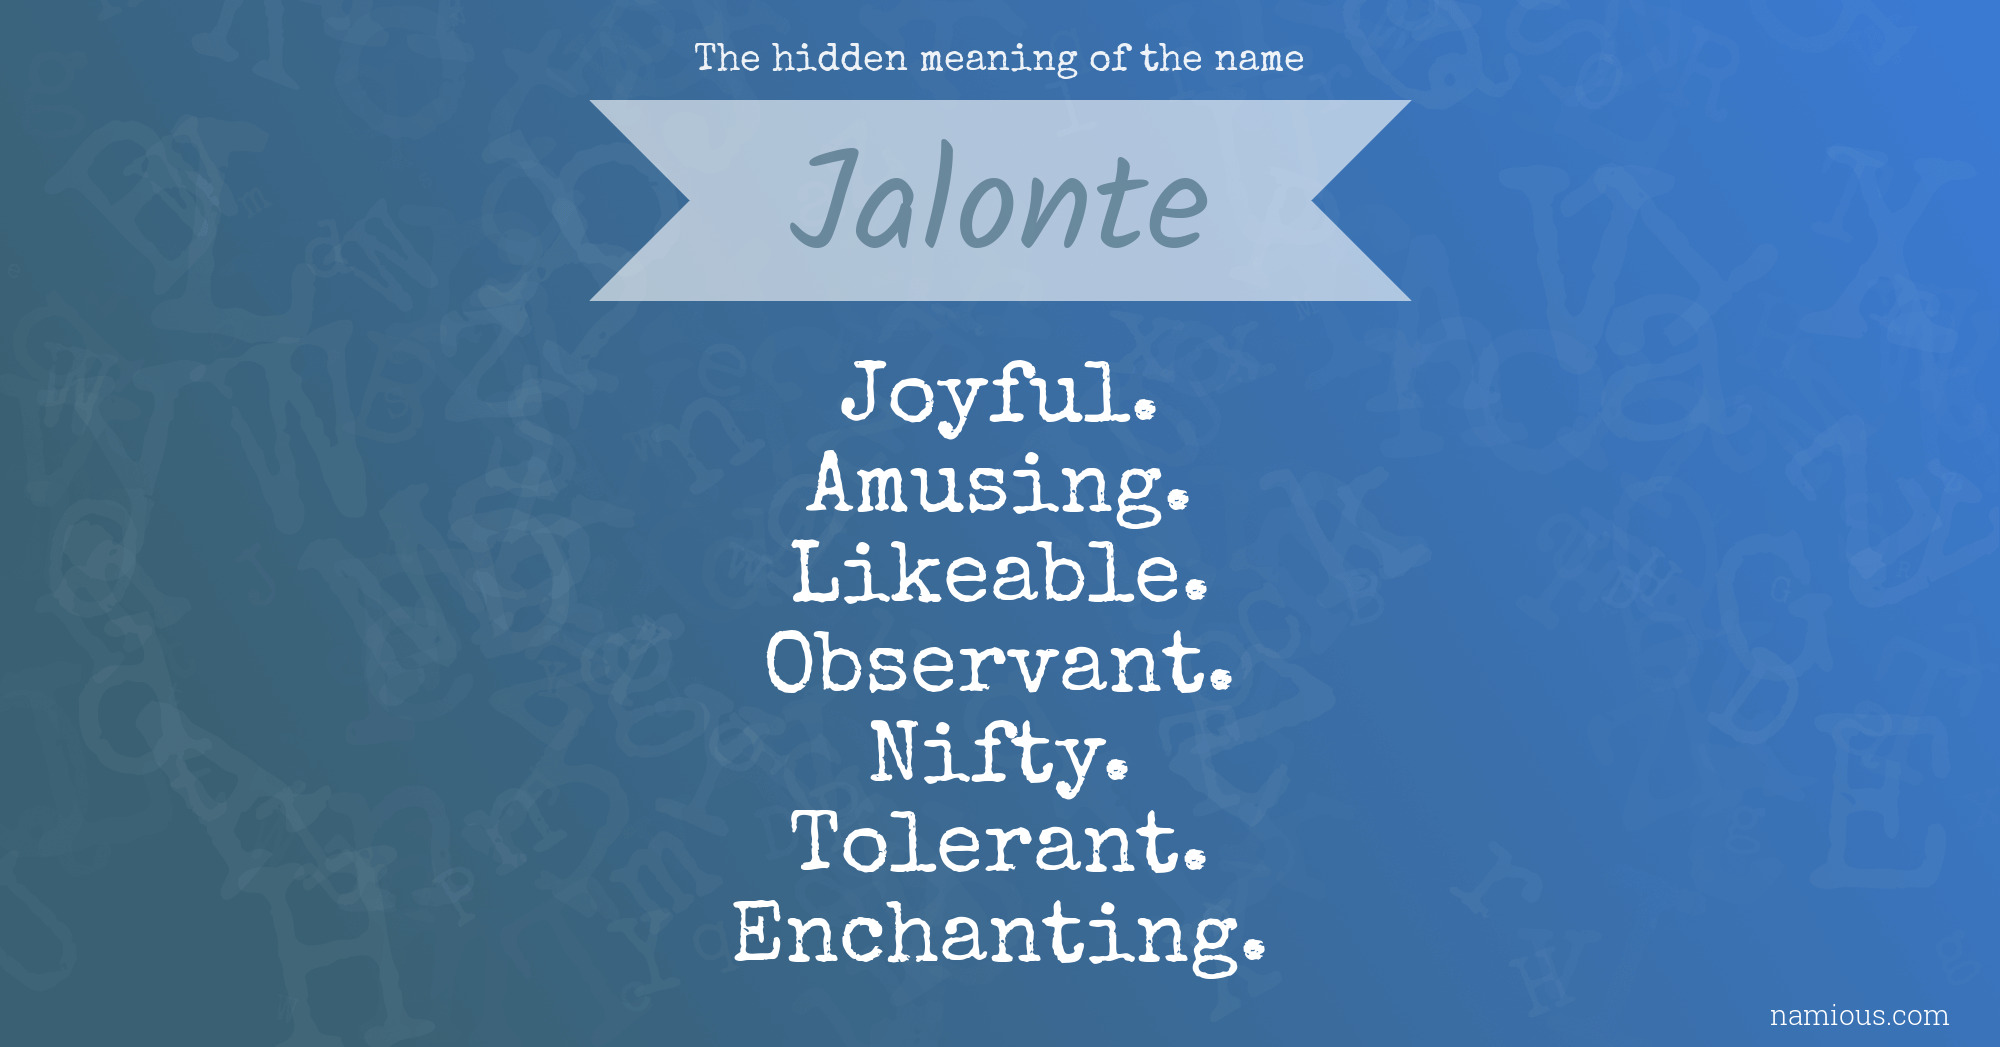 The hidden meaning of the name Jalonte